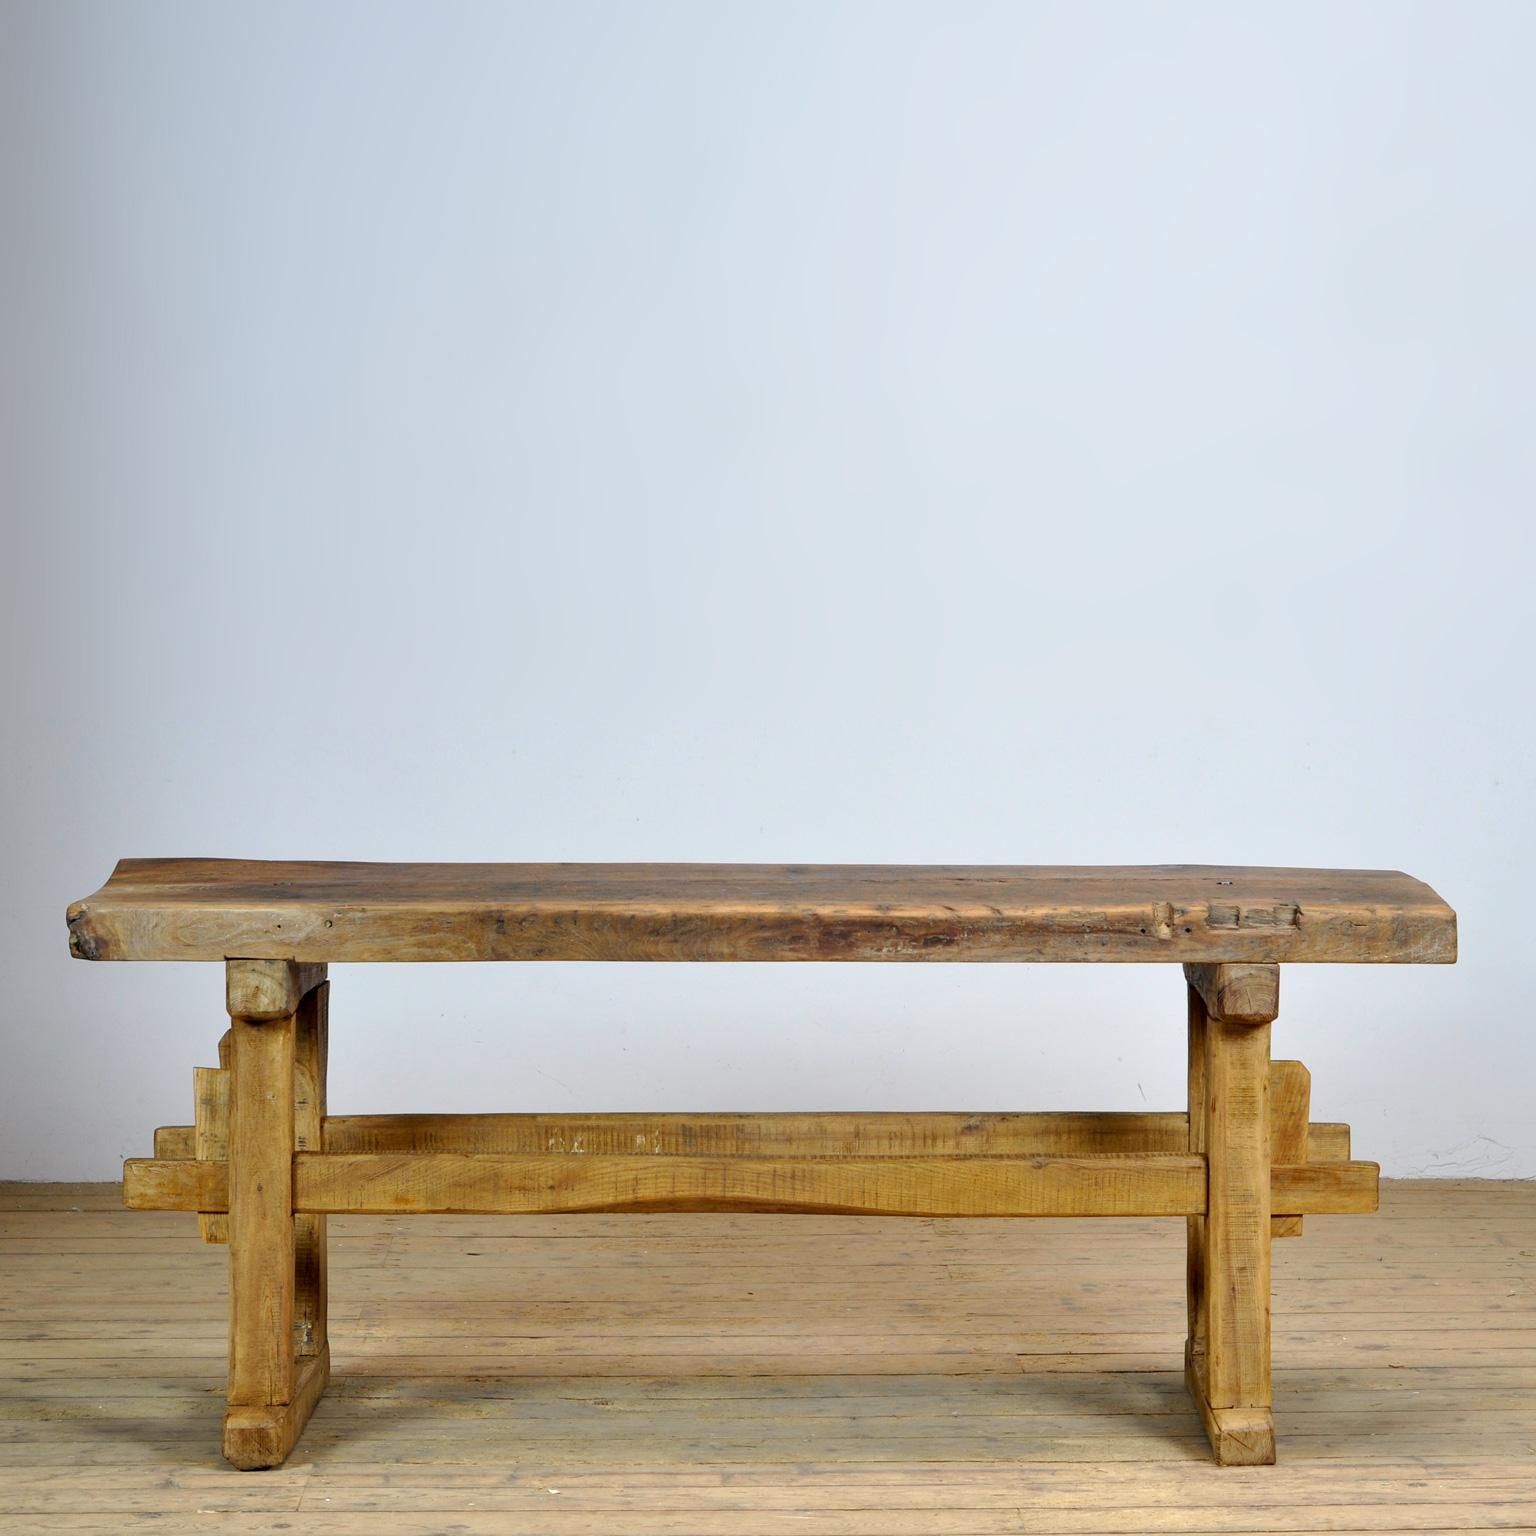 Oak work table from around 1930 produced in France. The top is 8 cm thick and made from one piece of wood. The table is demountable.